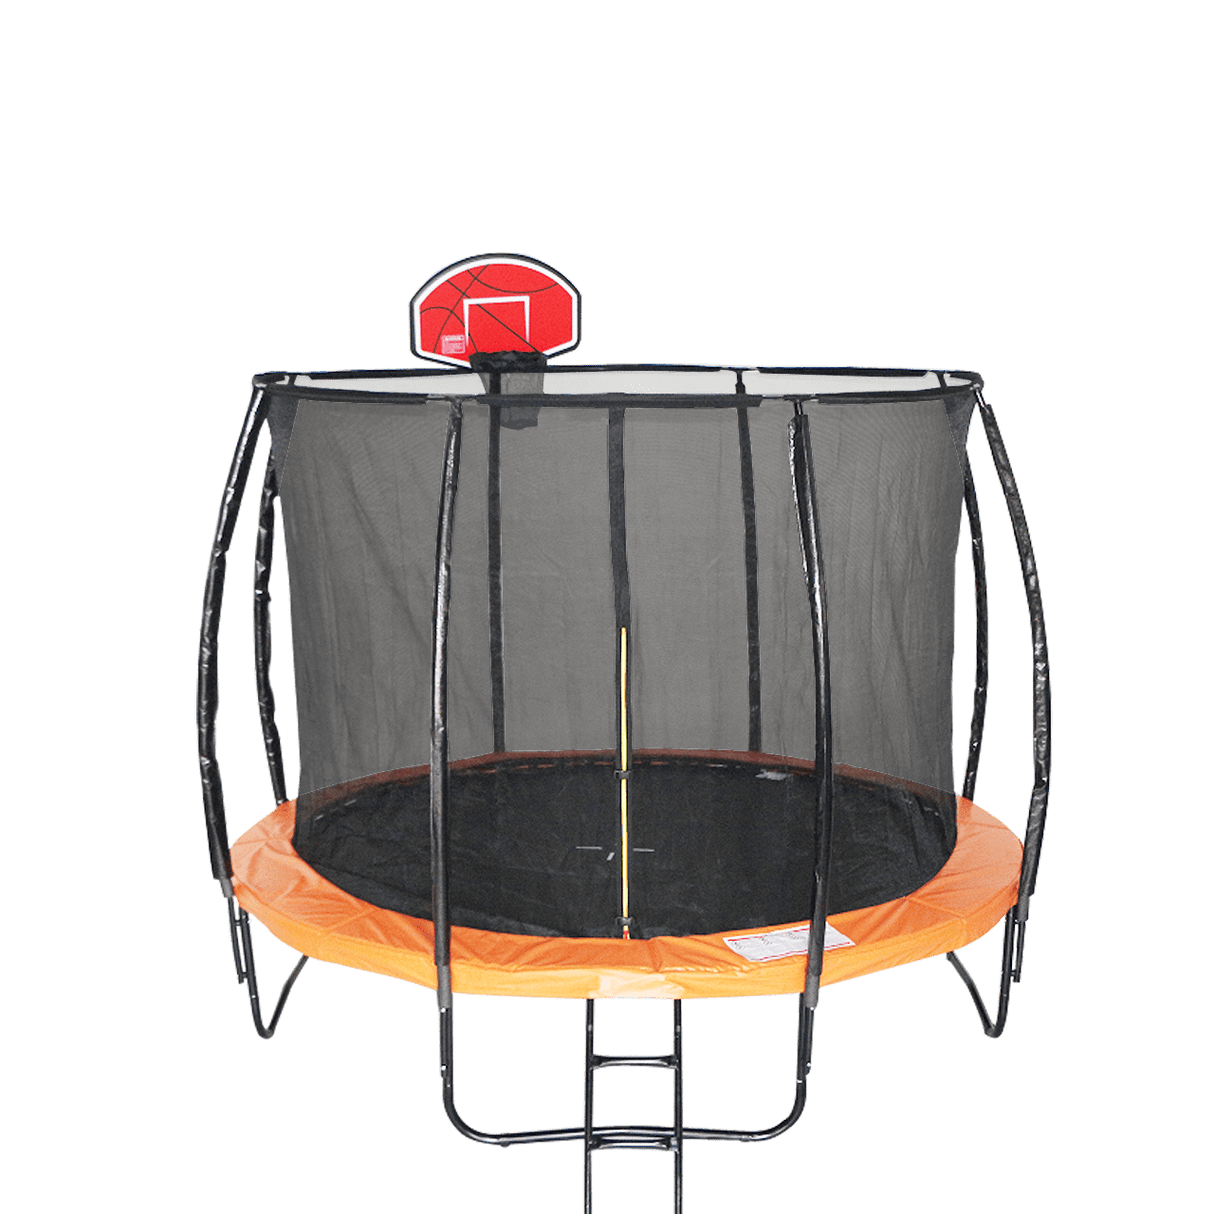 ALL 4 KIDS 12 FT Jump Zone Spring Trampoline with Basketball Board